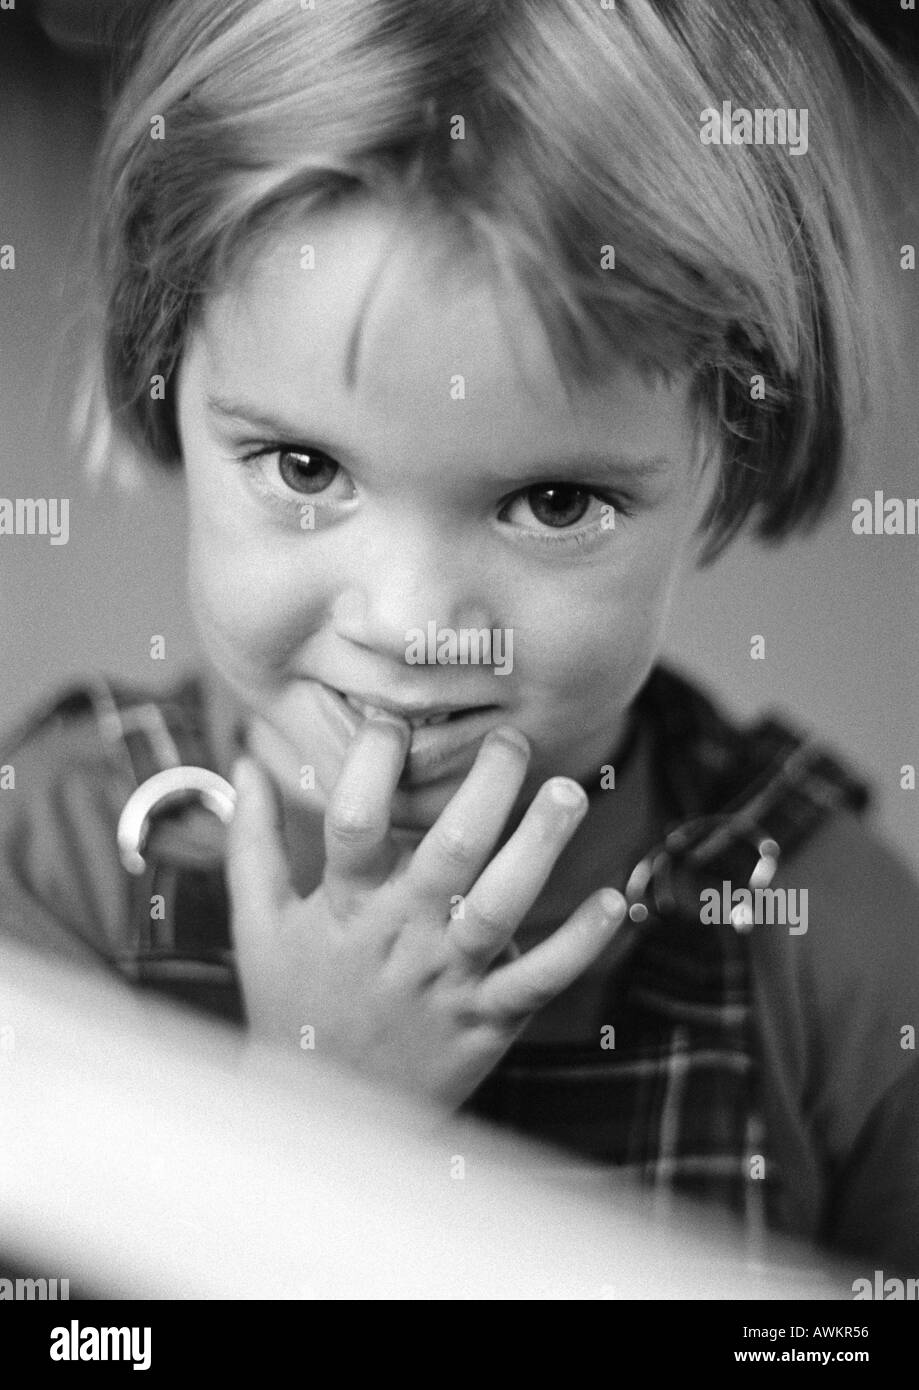 Little girl with finger in mouth, portrait, b&w Stock Photo